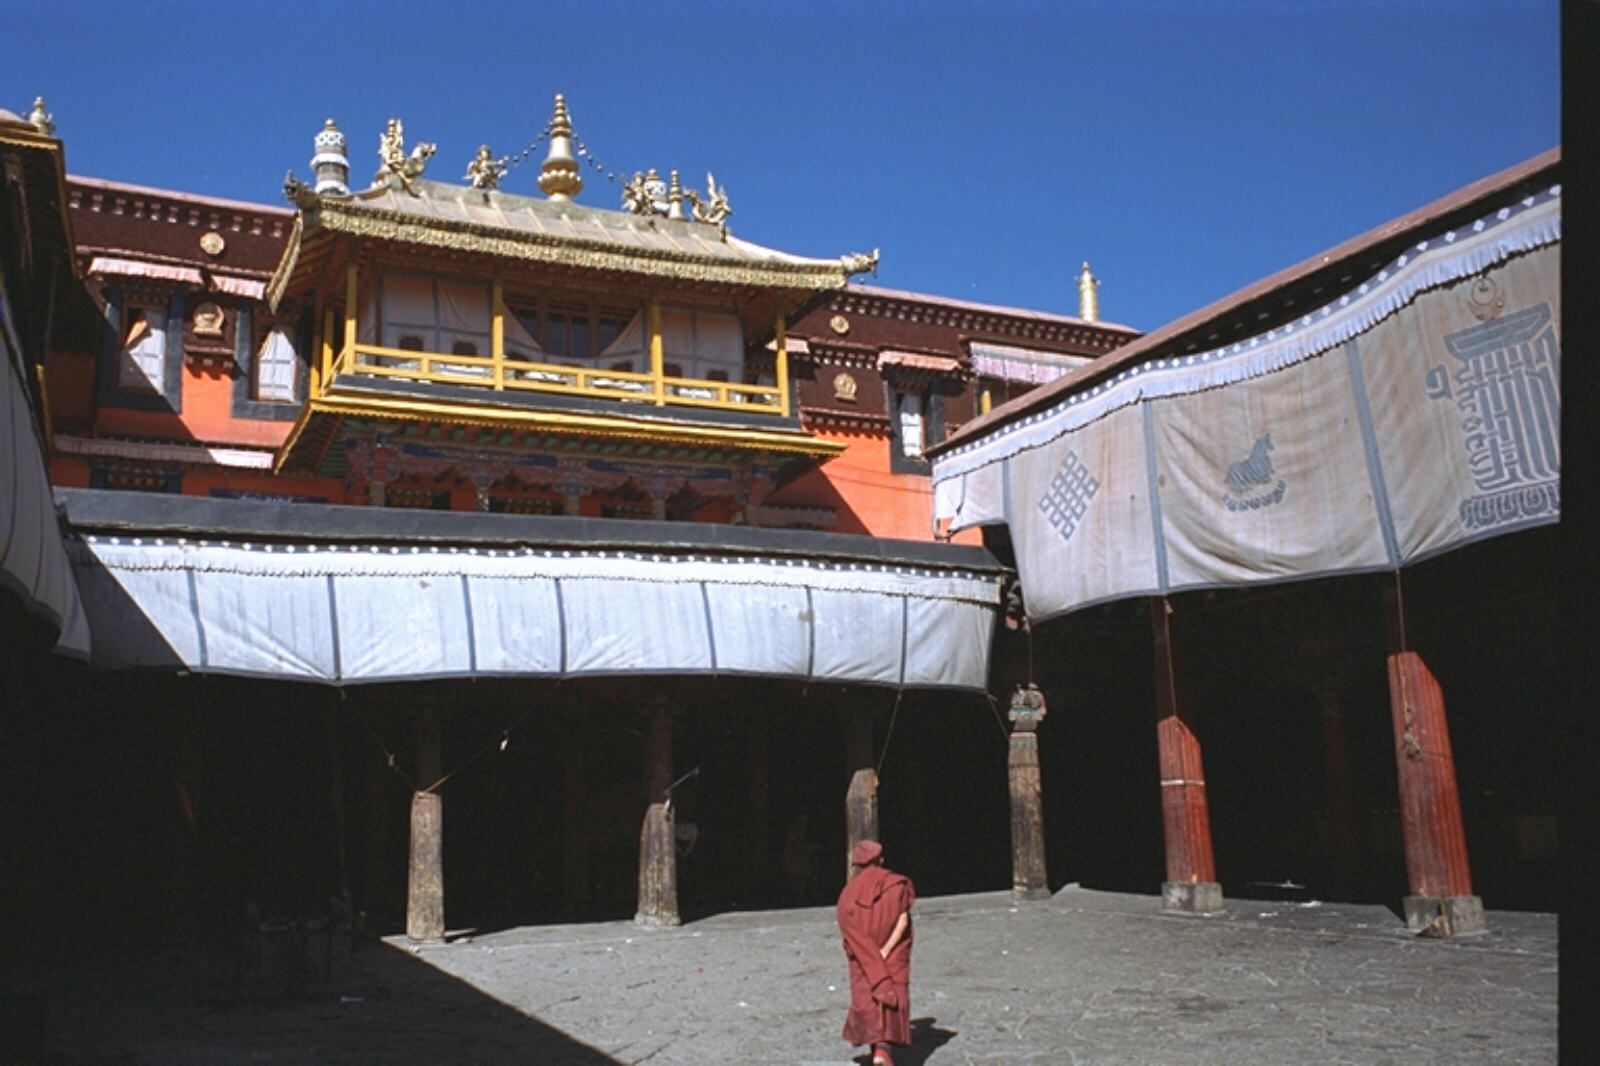 The Assembly Hall in the Jokhang in Lhasa Tibet